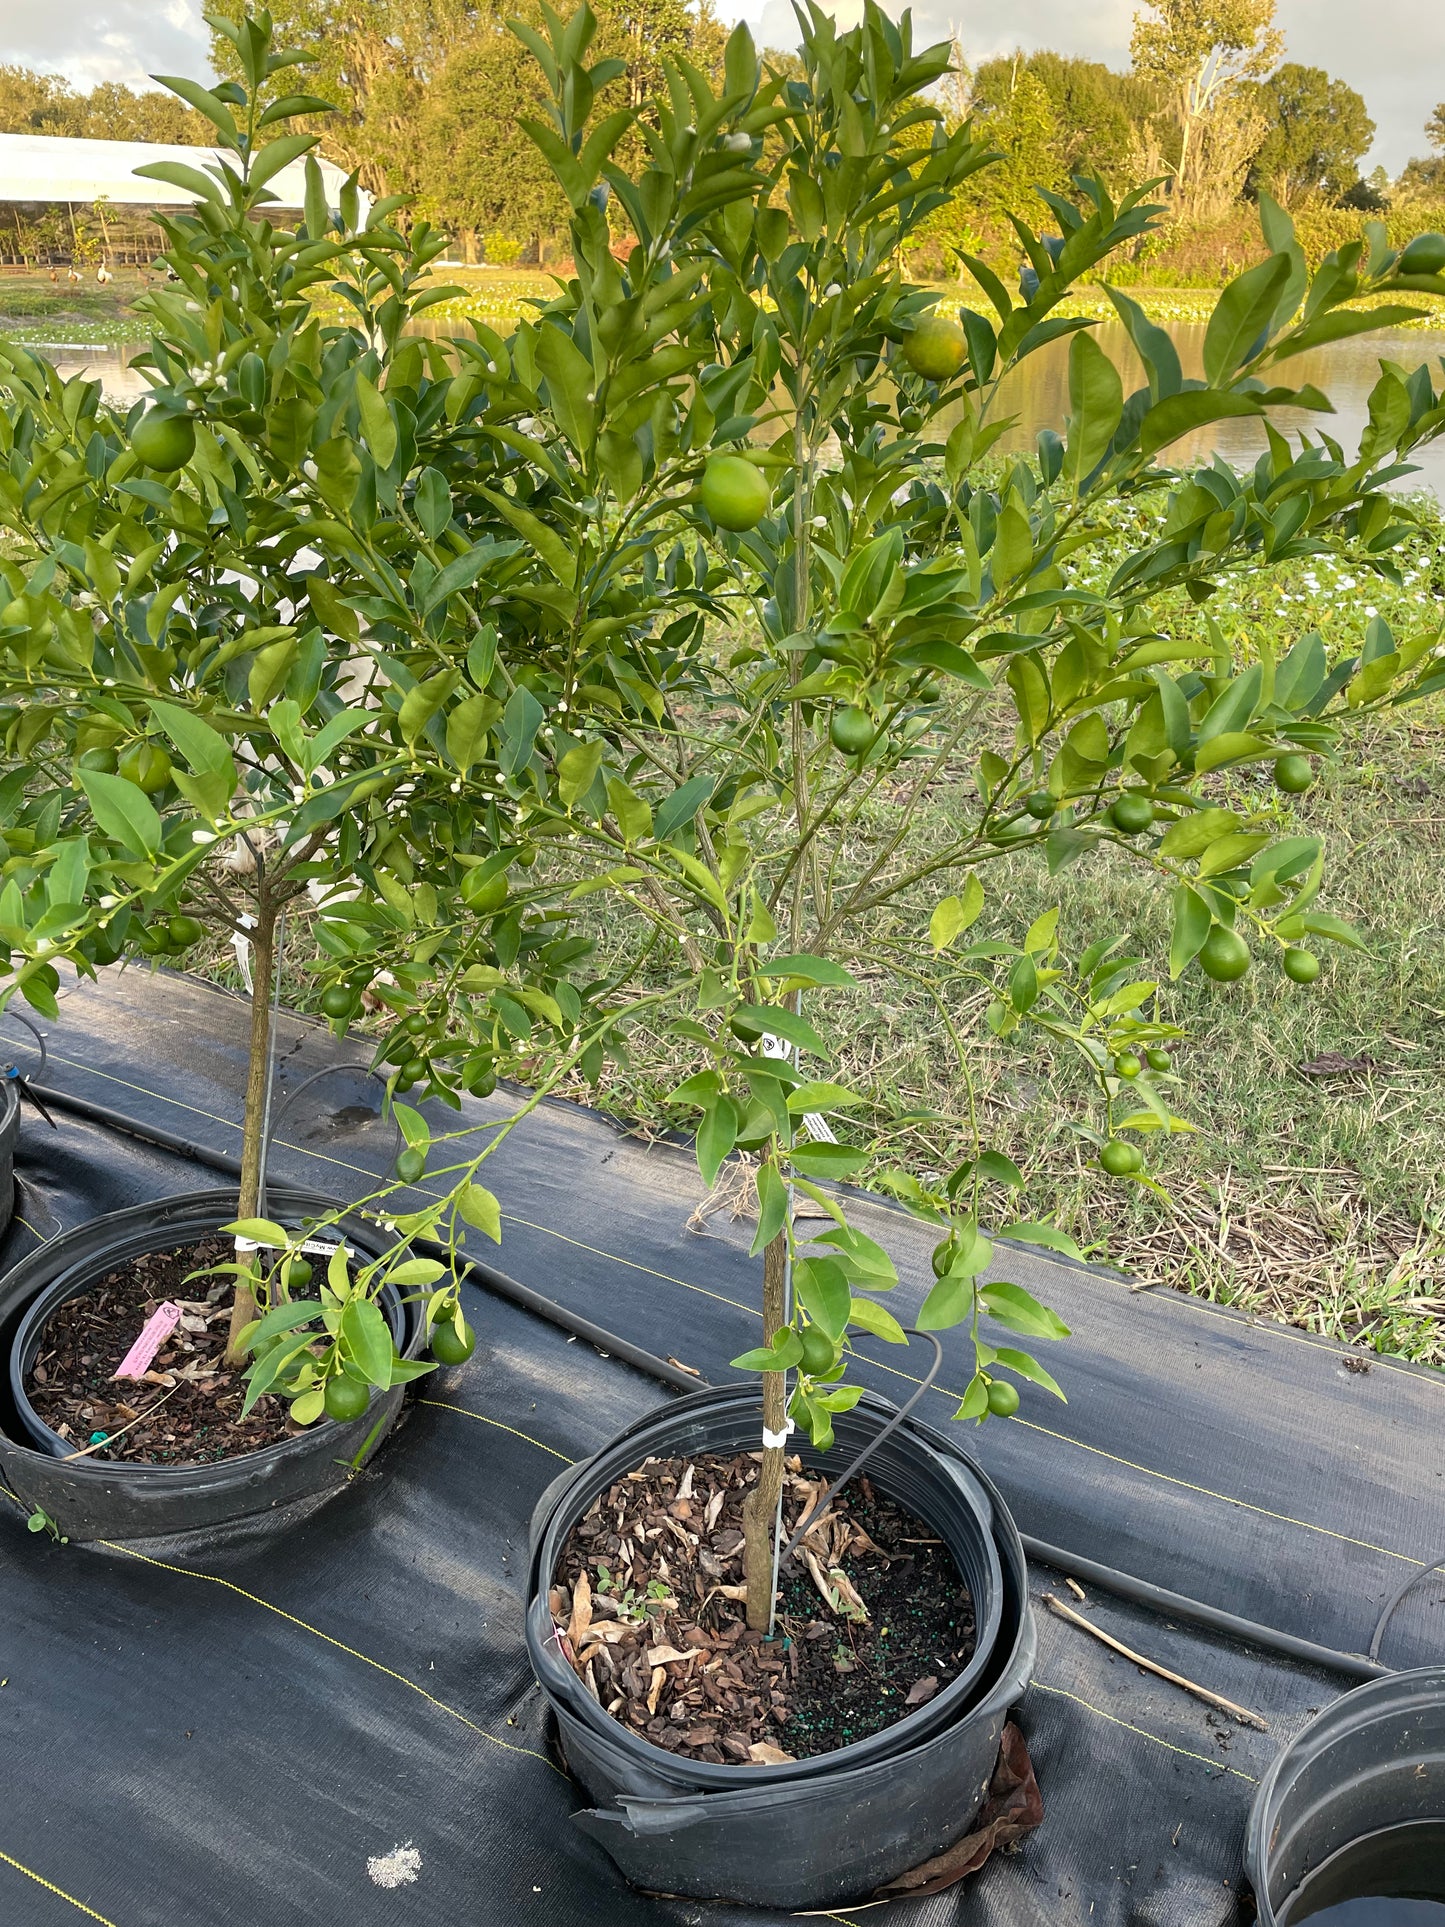 15 gallon Keylime tree with fruit - free ship